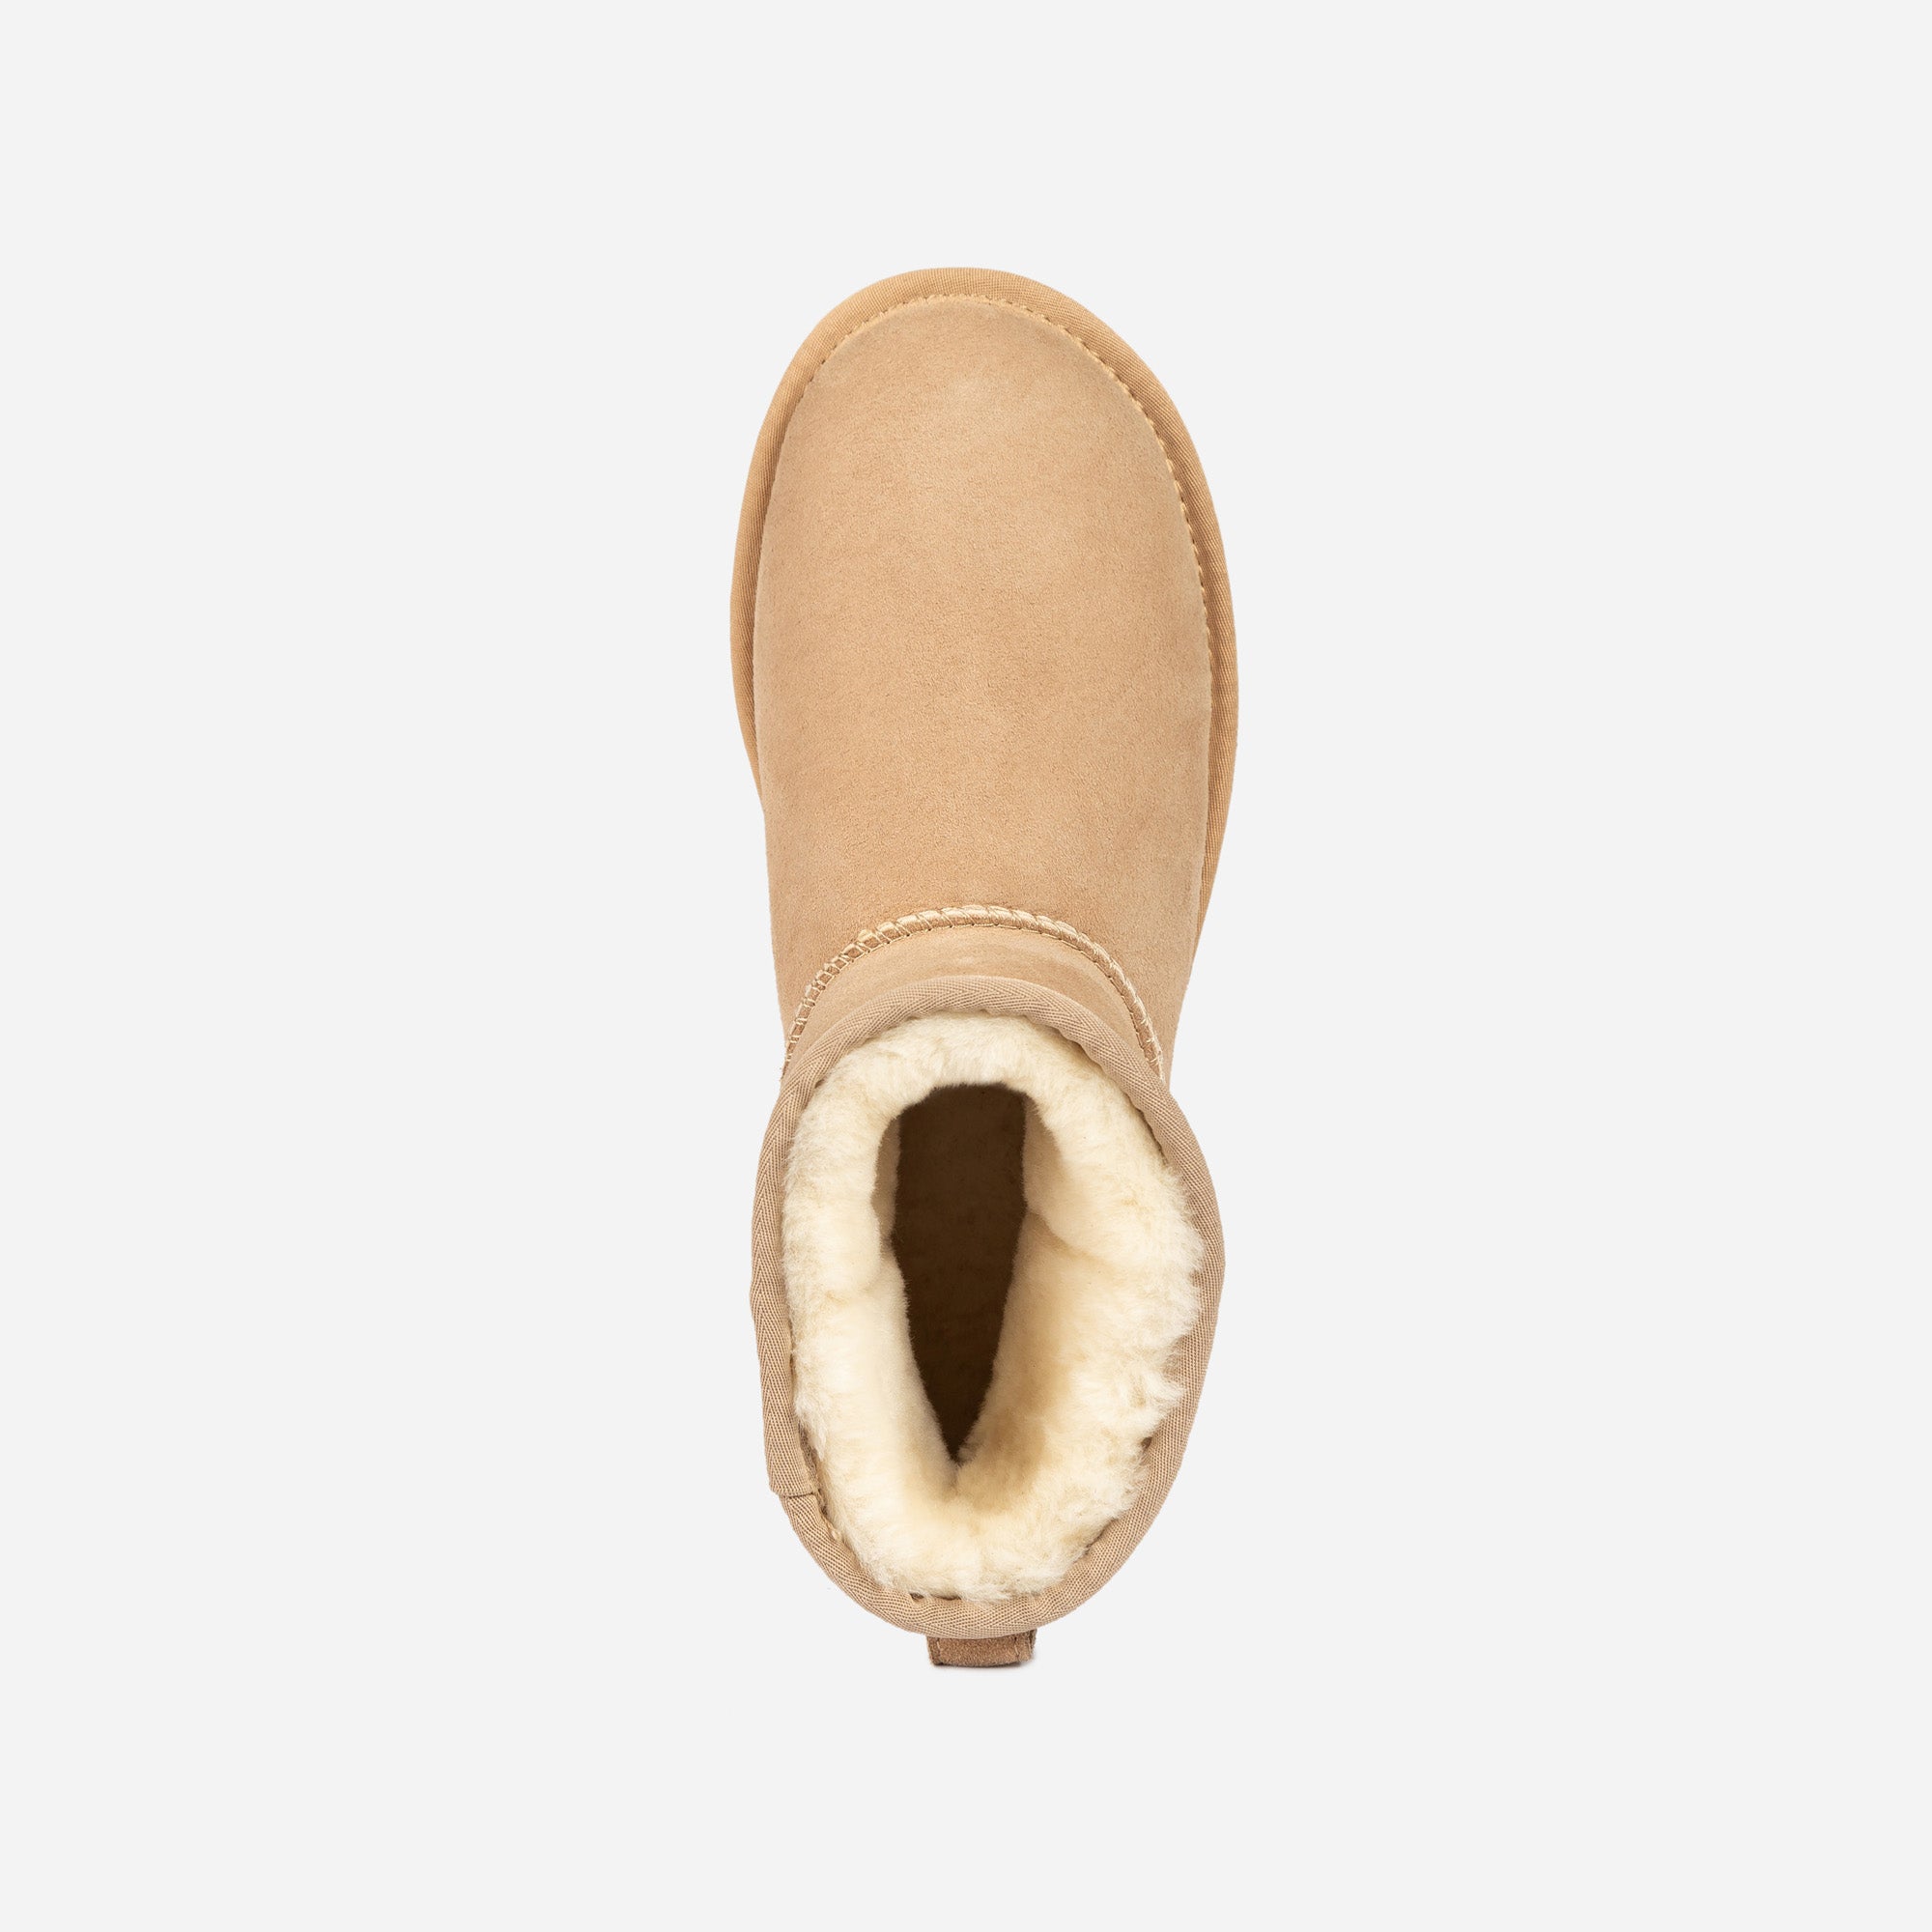 Ugg Classic Mini Boots (Water Resistant)